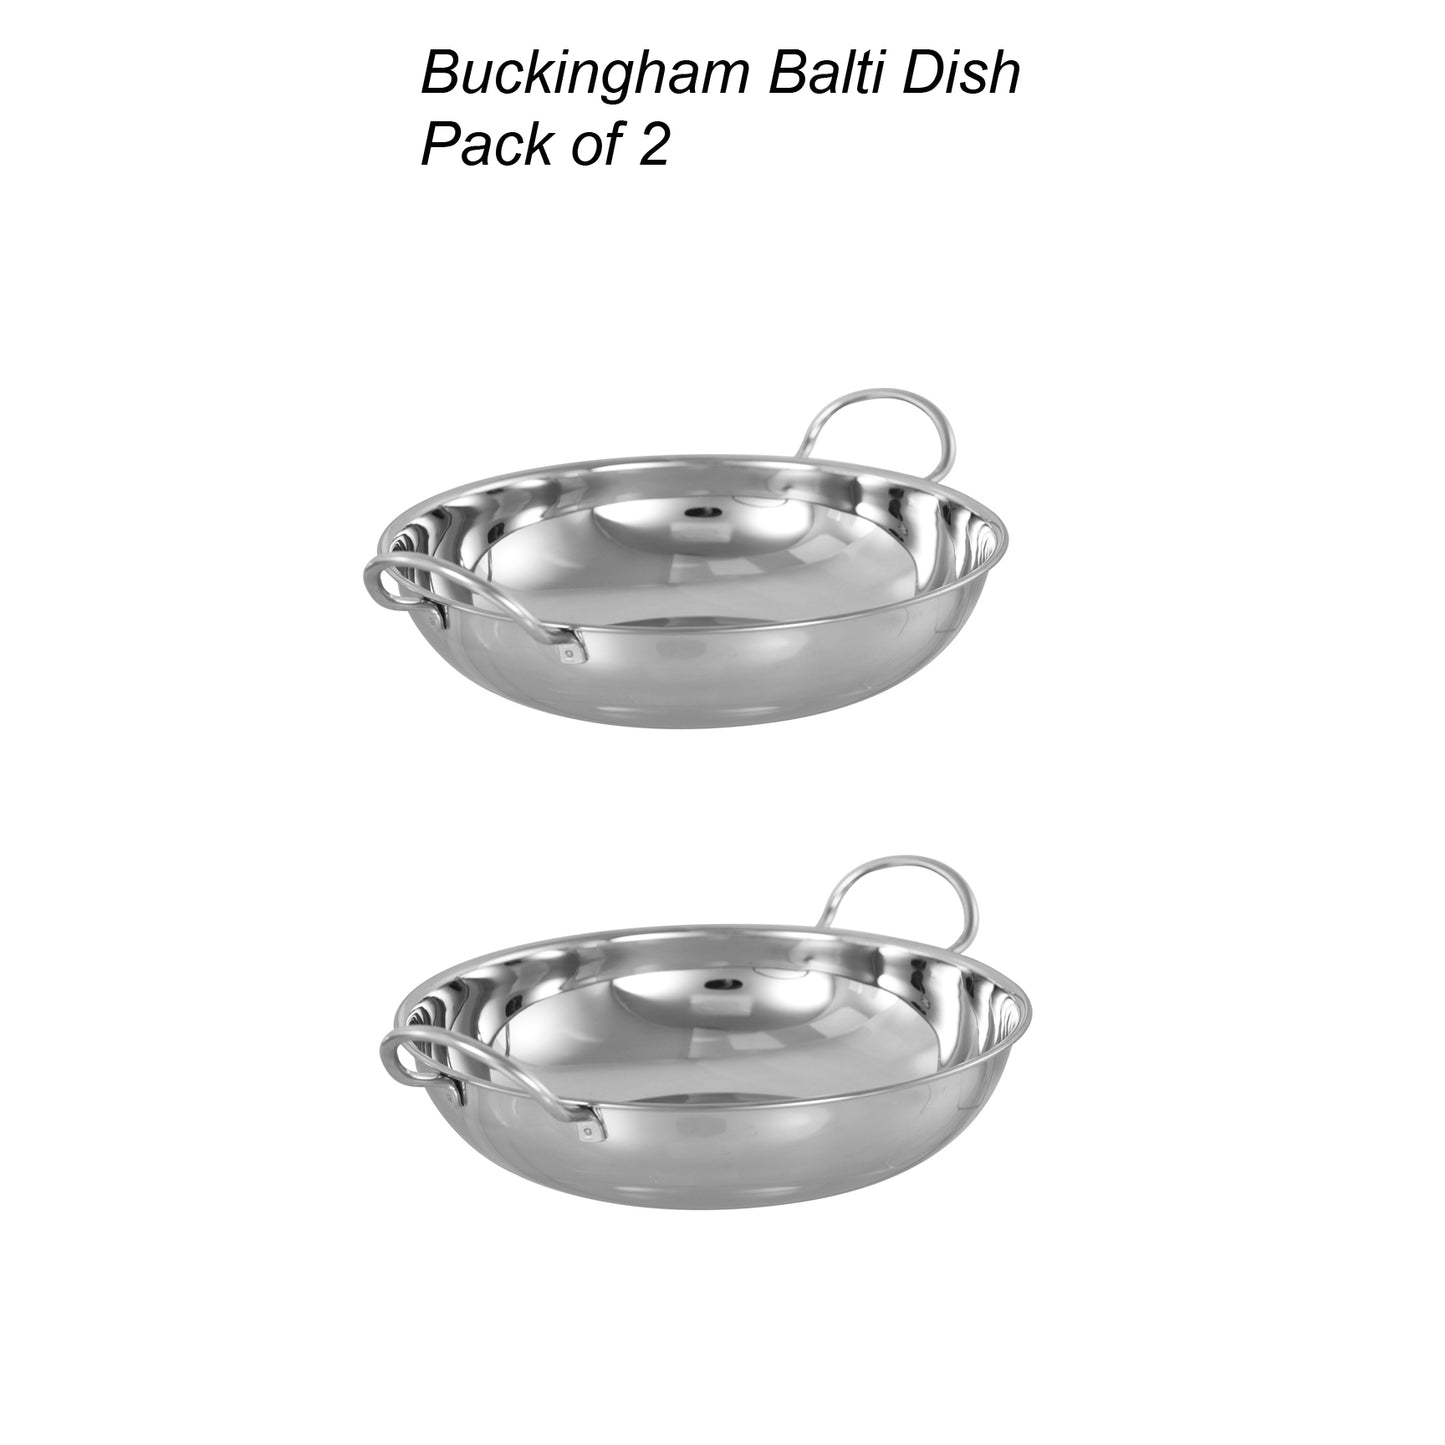 Buckingham Stainless Steel Balti Dish Indian Curry Food Serving Dish 15 cm, Pack of 2